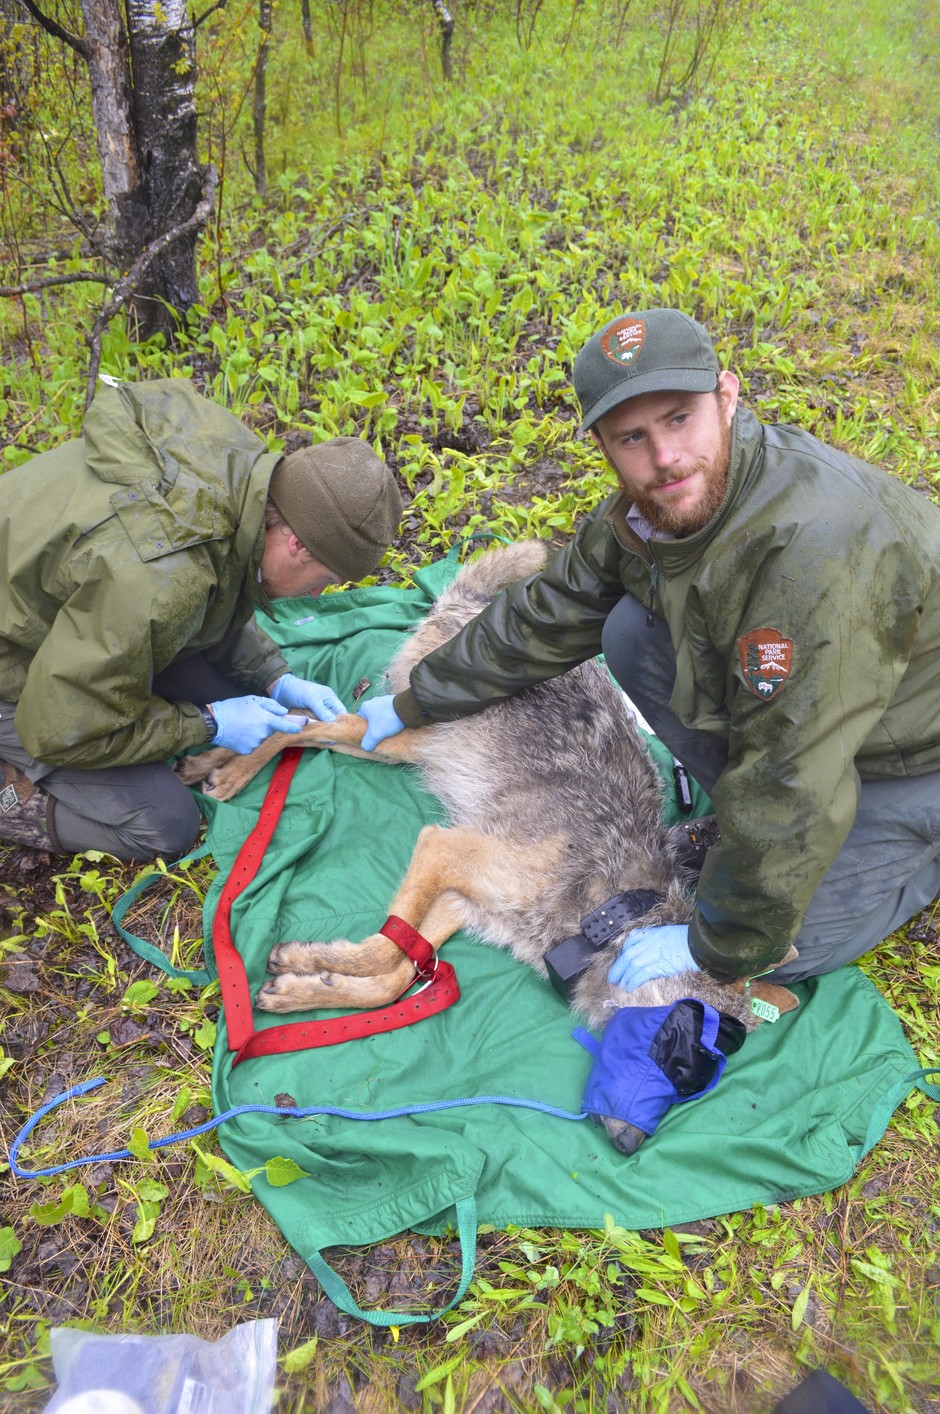 Collaring a wolf in Voyageurs National Park and also collecting biological samples. Austin Homkes, a graduate student, is collecting a blood sample while I (Tom Gable) hold the leg to make the vein in the leg more obvious and easier to get a blood sample.